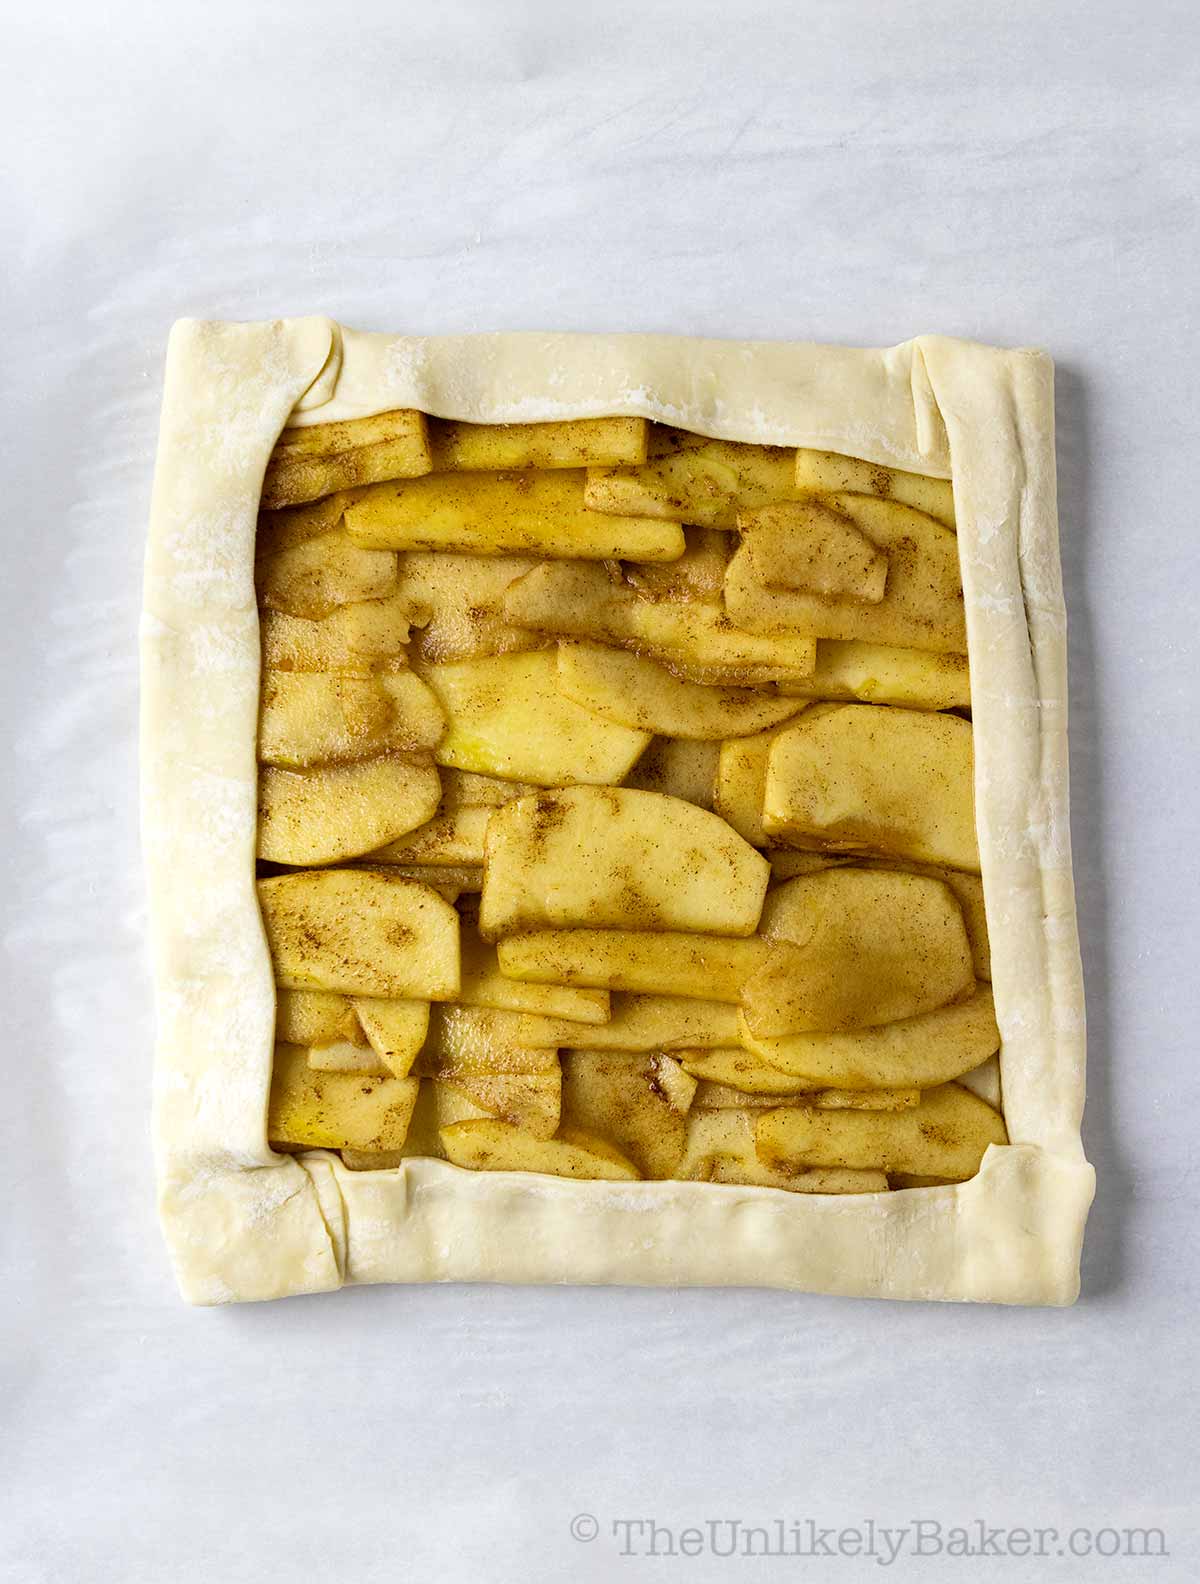 Fold puff pastry over apple slices